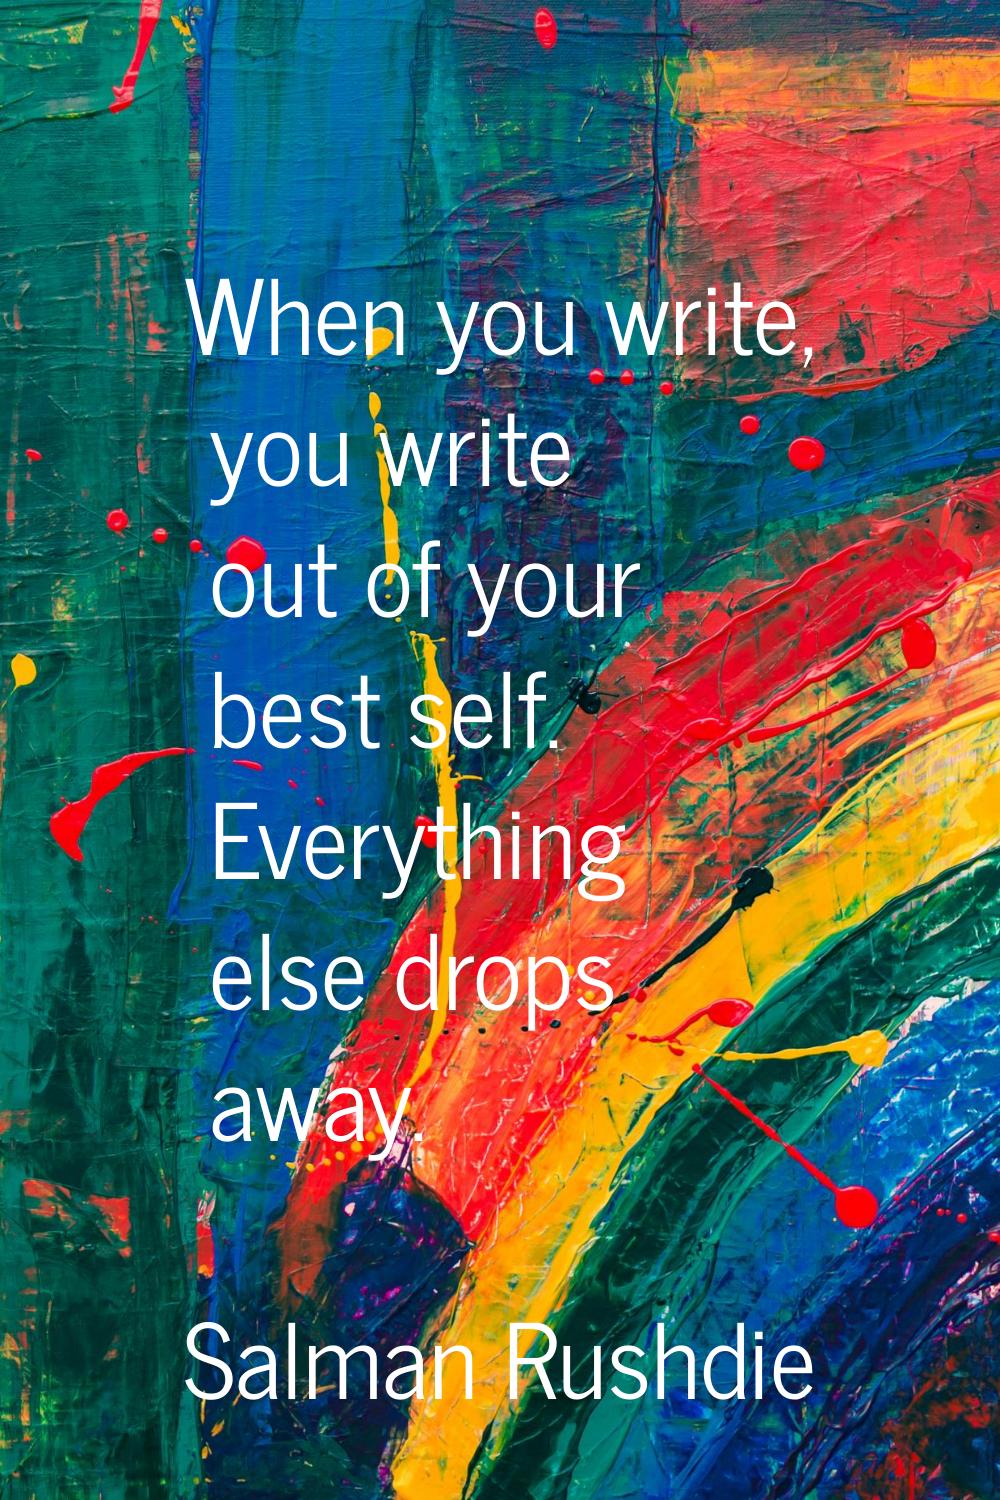 When you write, you write out of your best self. Everything else drops away.